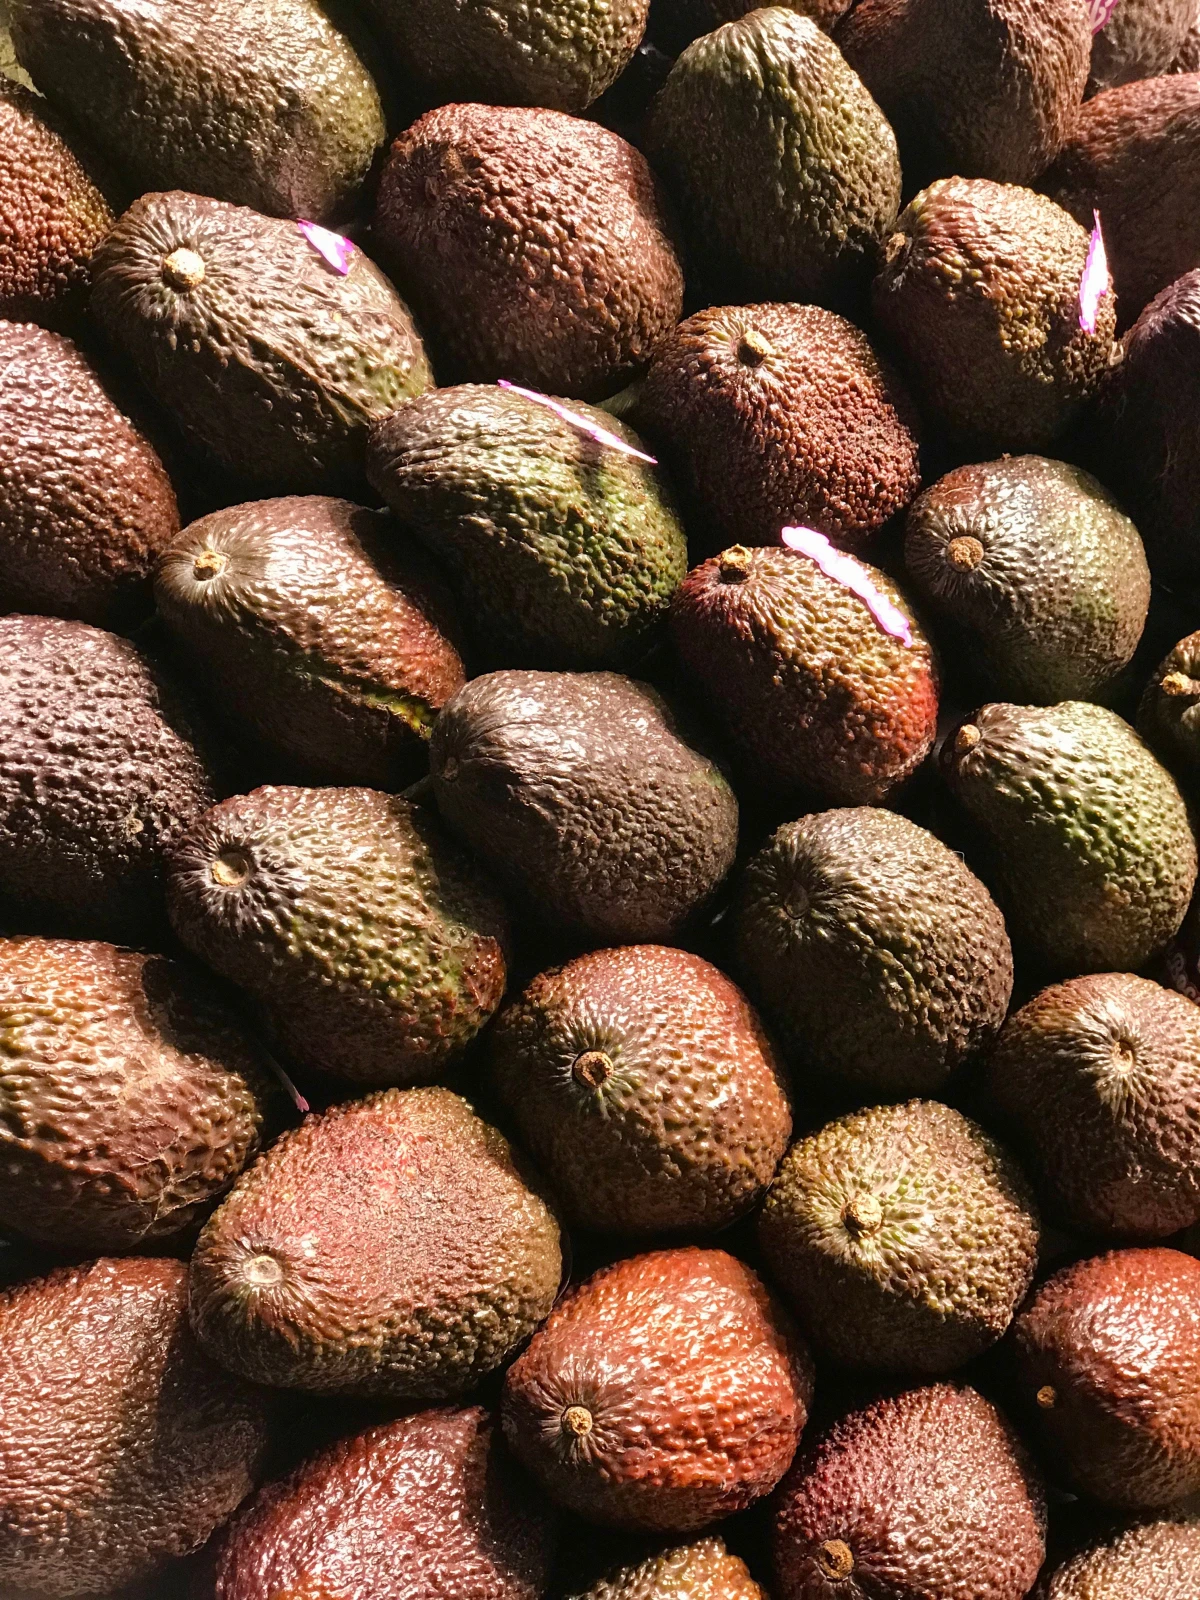 whole avocadoes